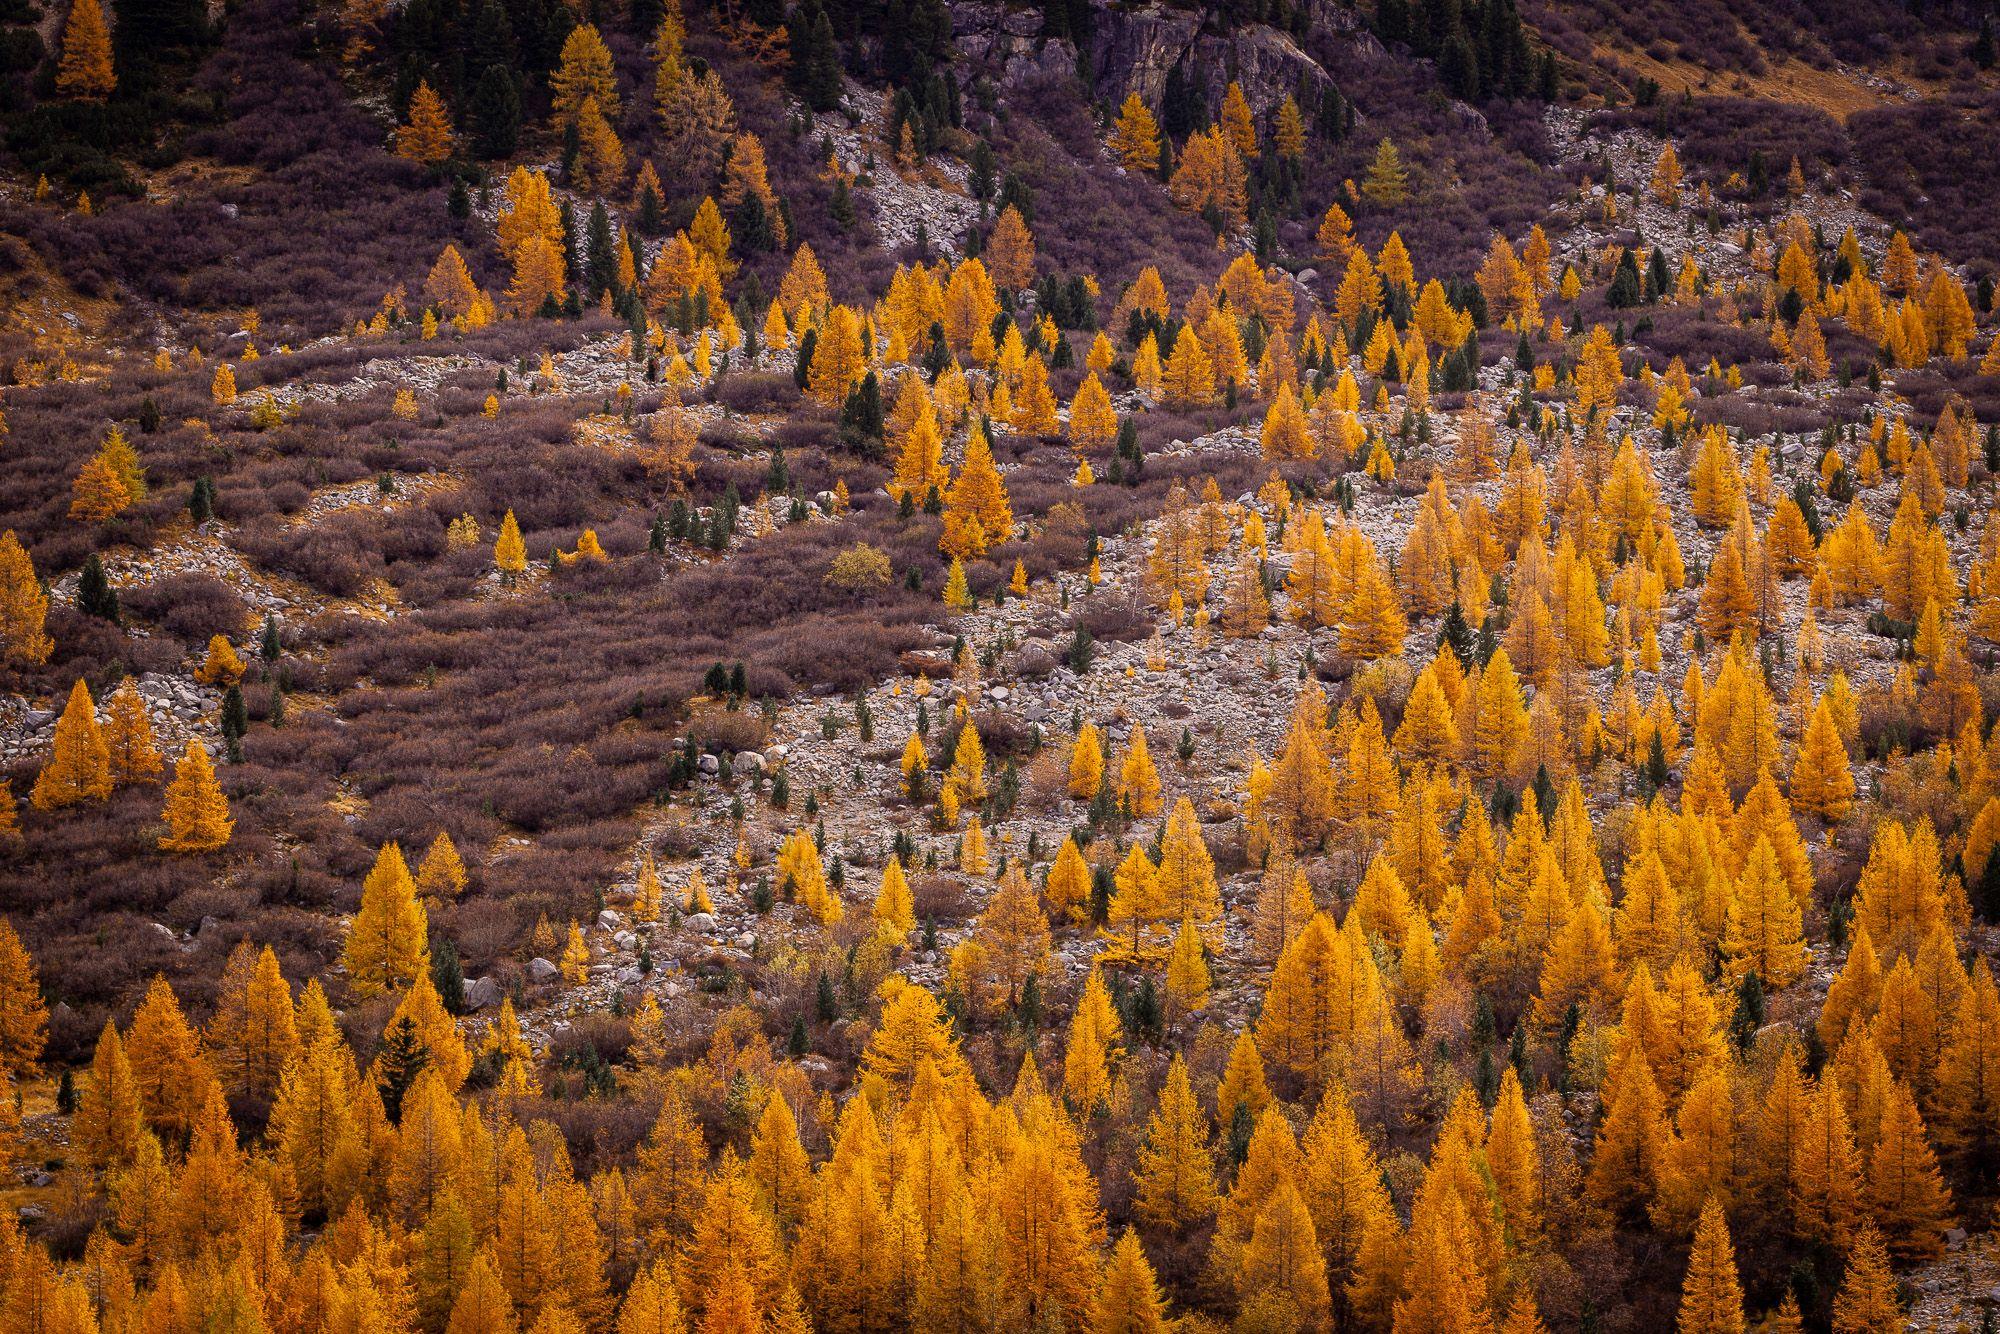 Larches in Val Morteratsch in the Engadine